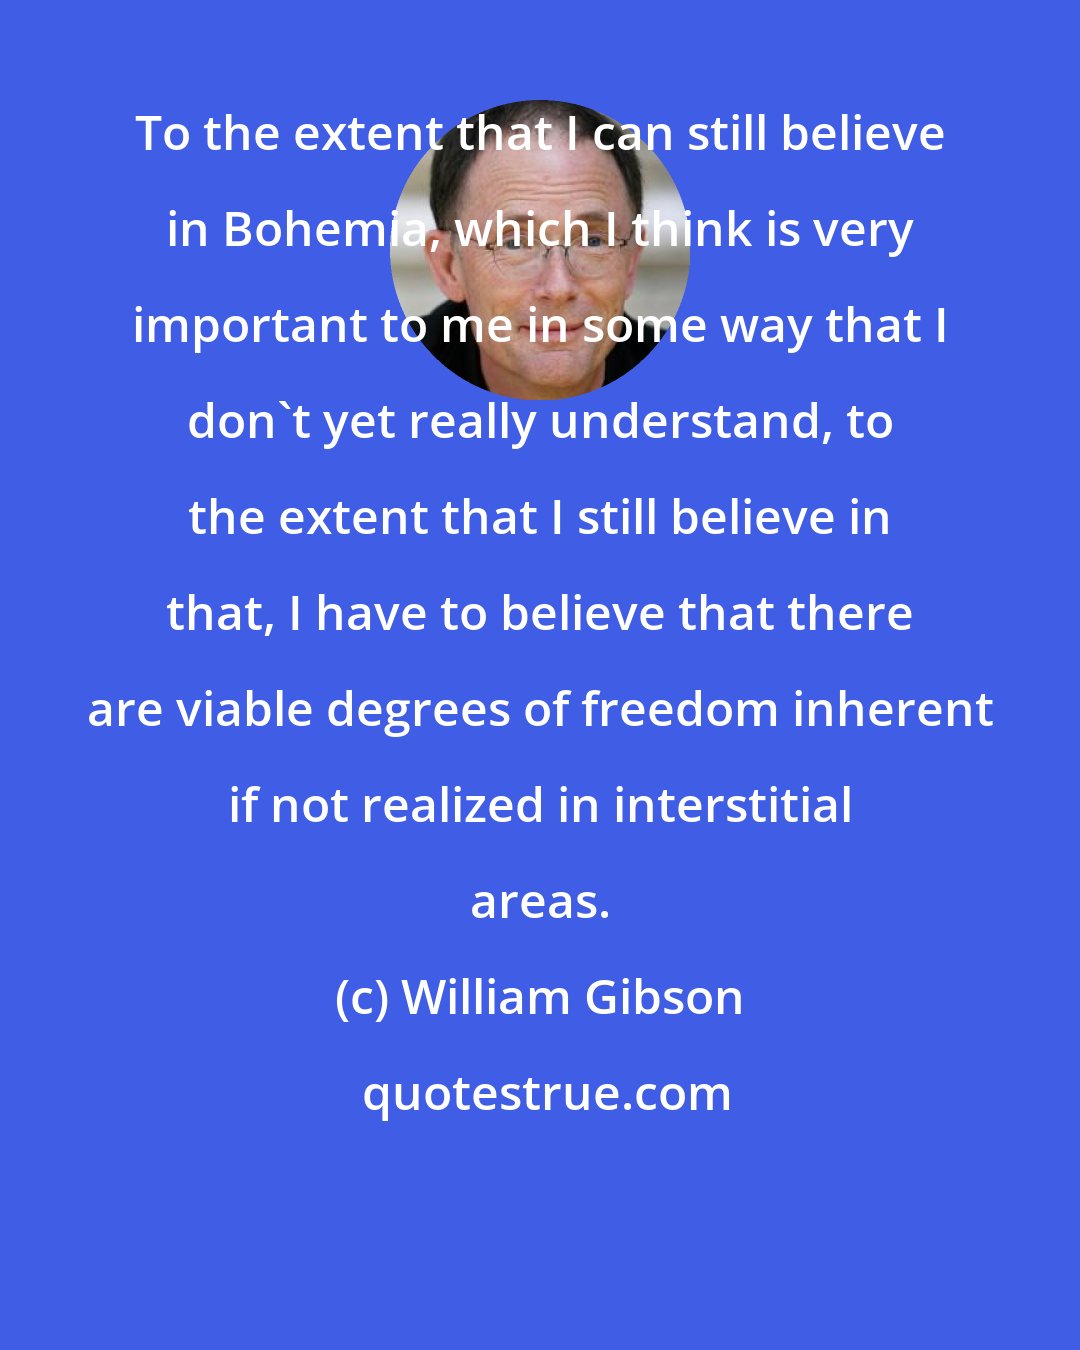 William Gibson: To the extent that I can still believe in Bohemia, which I think is very important to me in some way that I don't yet really understand, to the extent that I still believe in that, I have to believe that there are viable degrees of freedom inherent if not realized in interstitial areas.